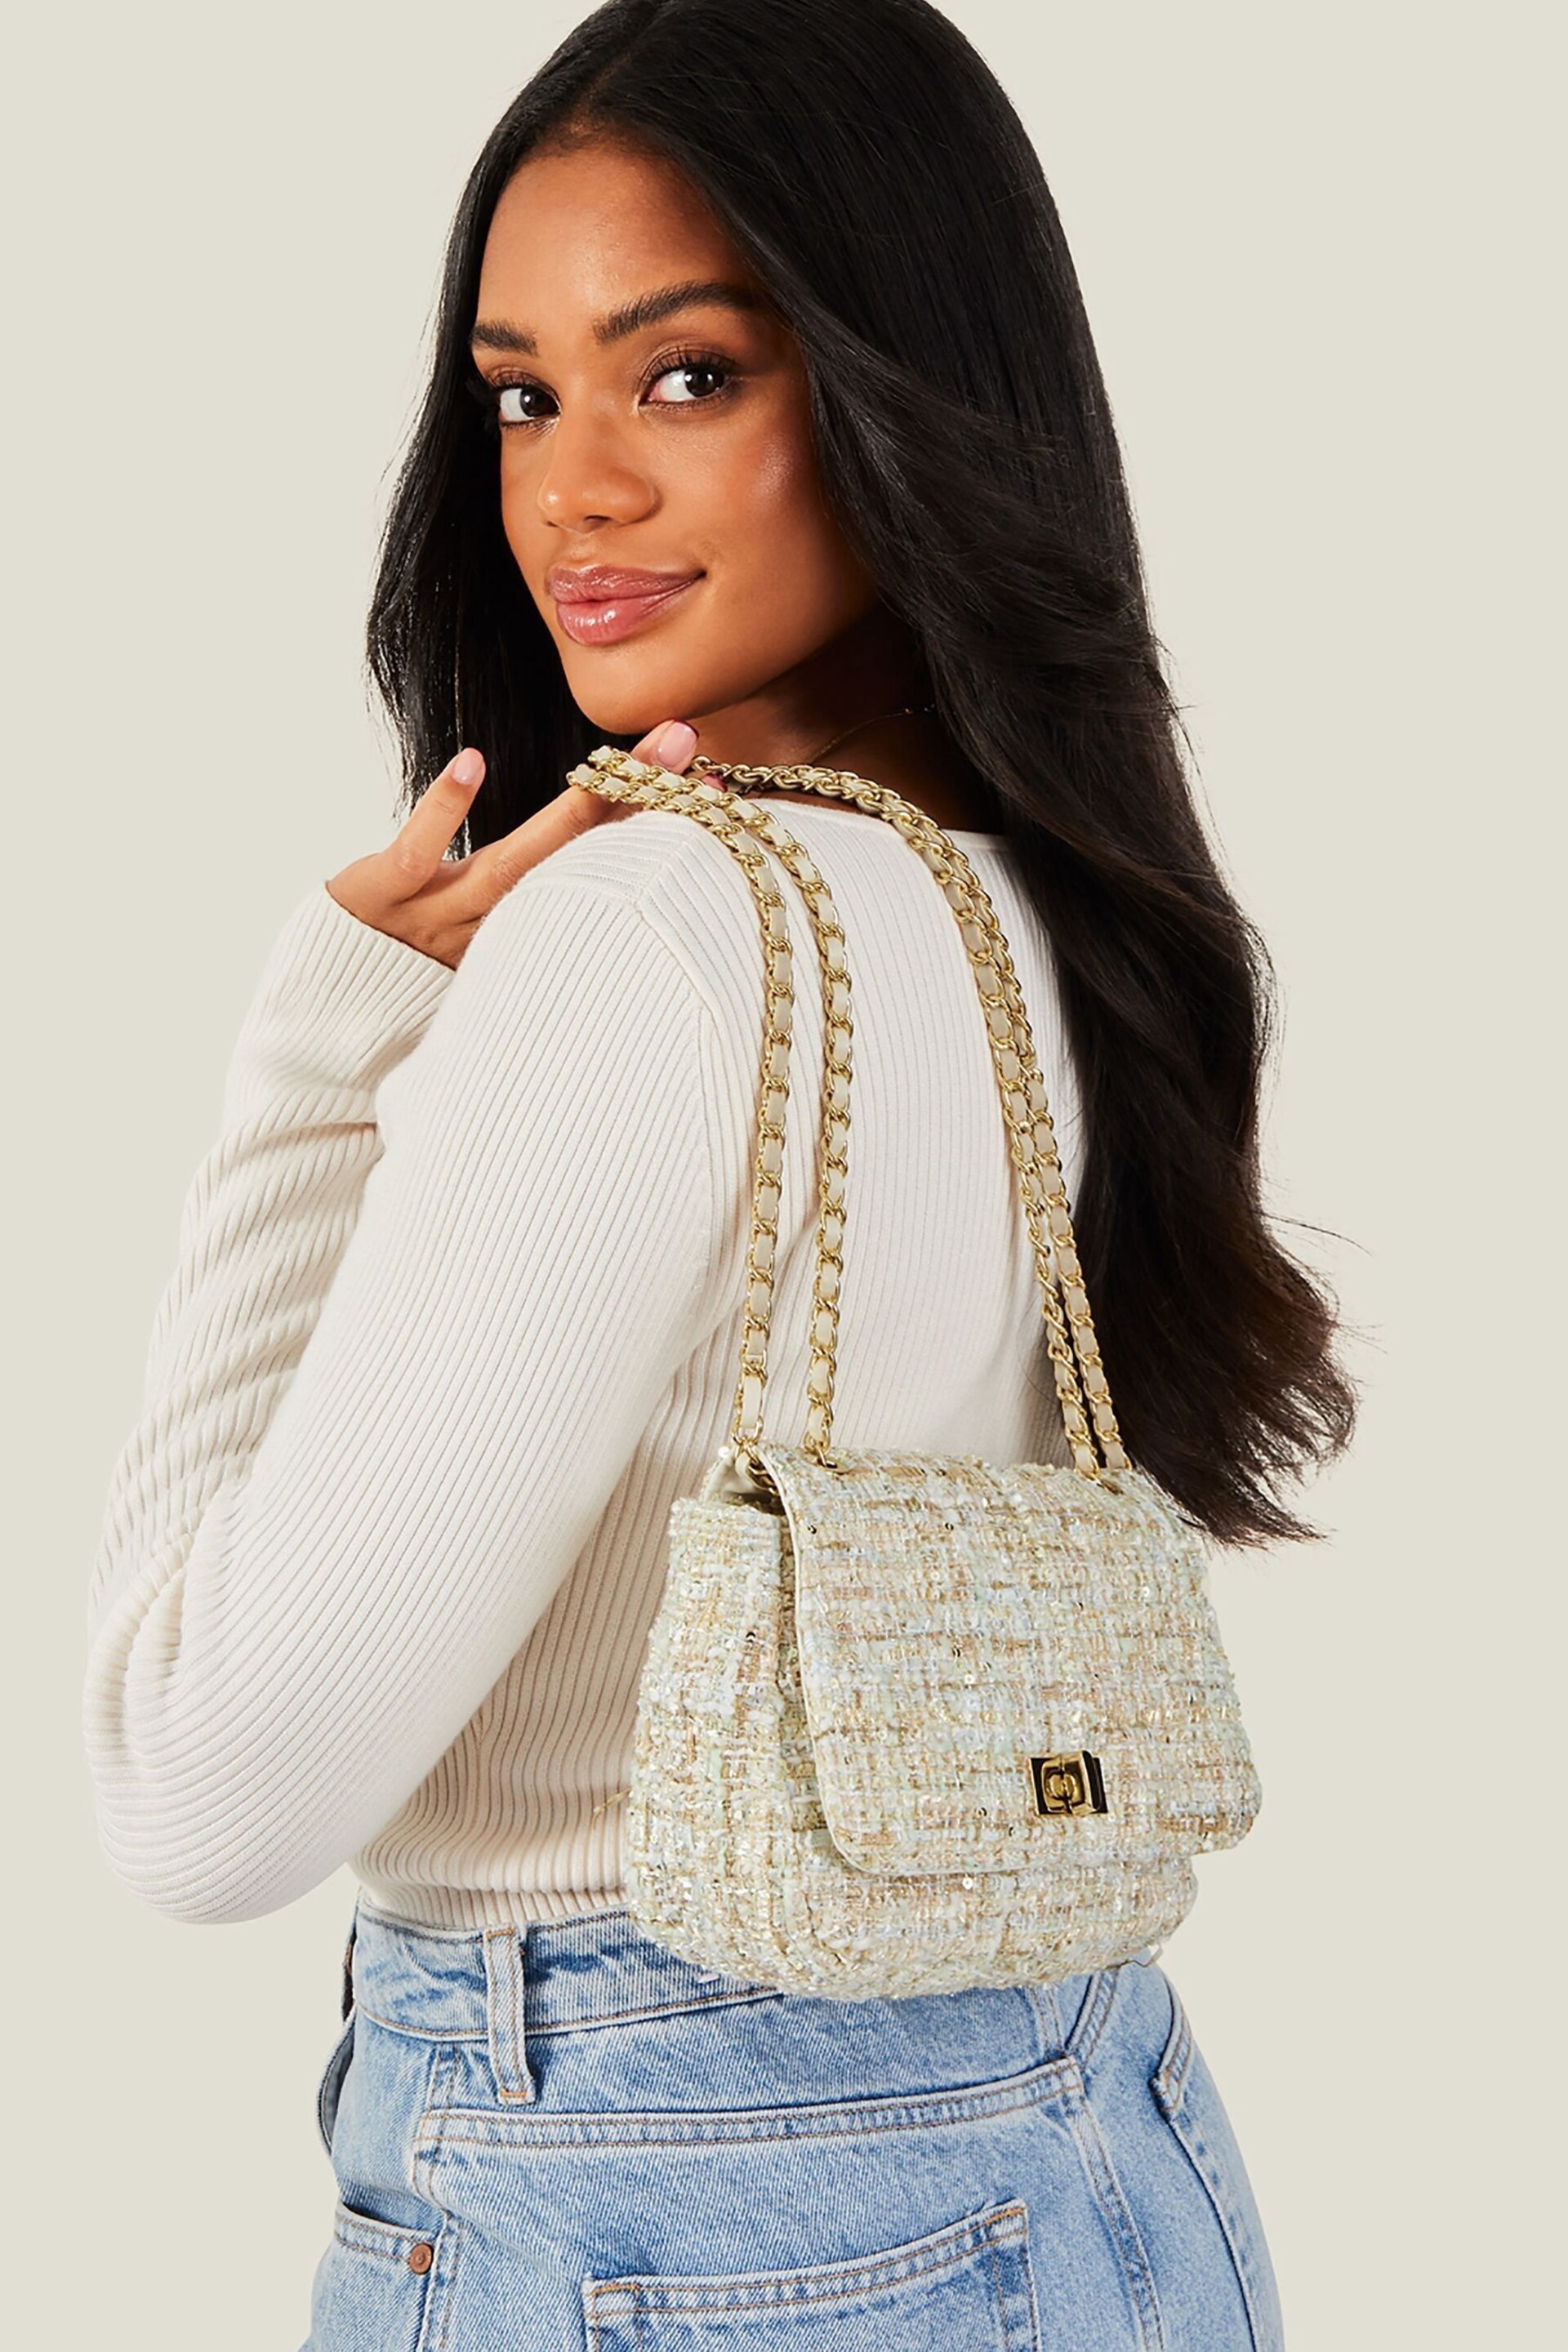 Accessorize White Boucle Cross-Body Bag - Image 1 of 4